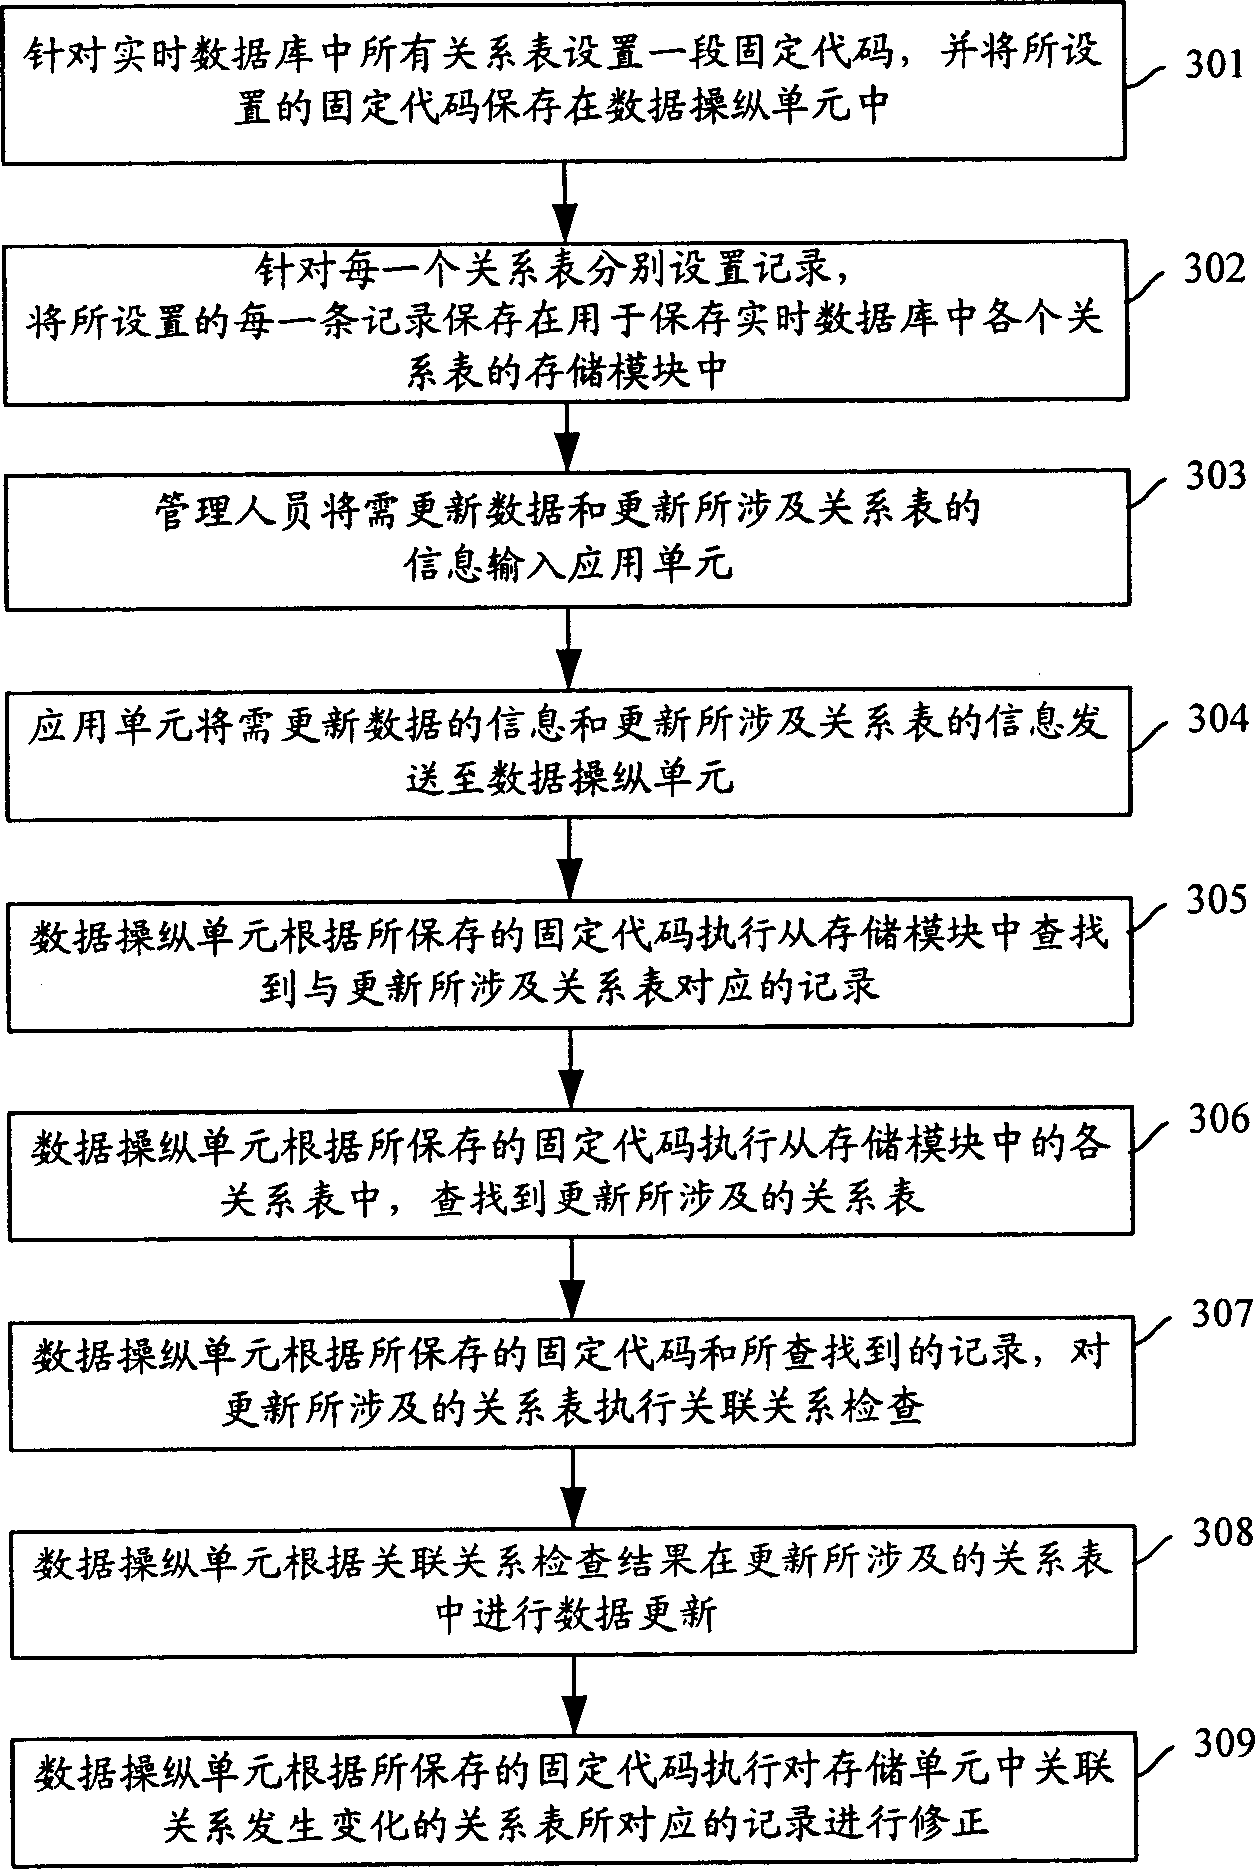 Method and system for realizing update data in real time data bank